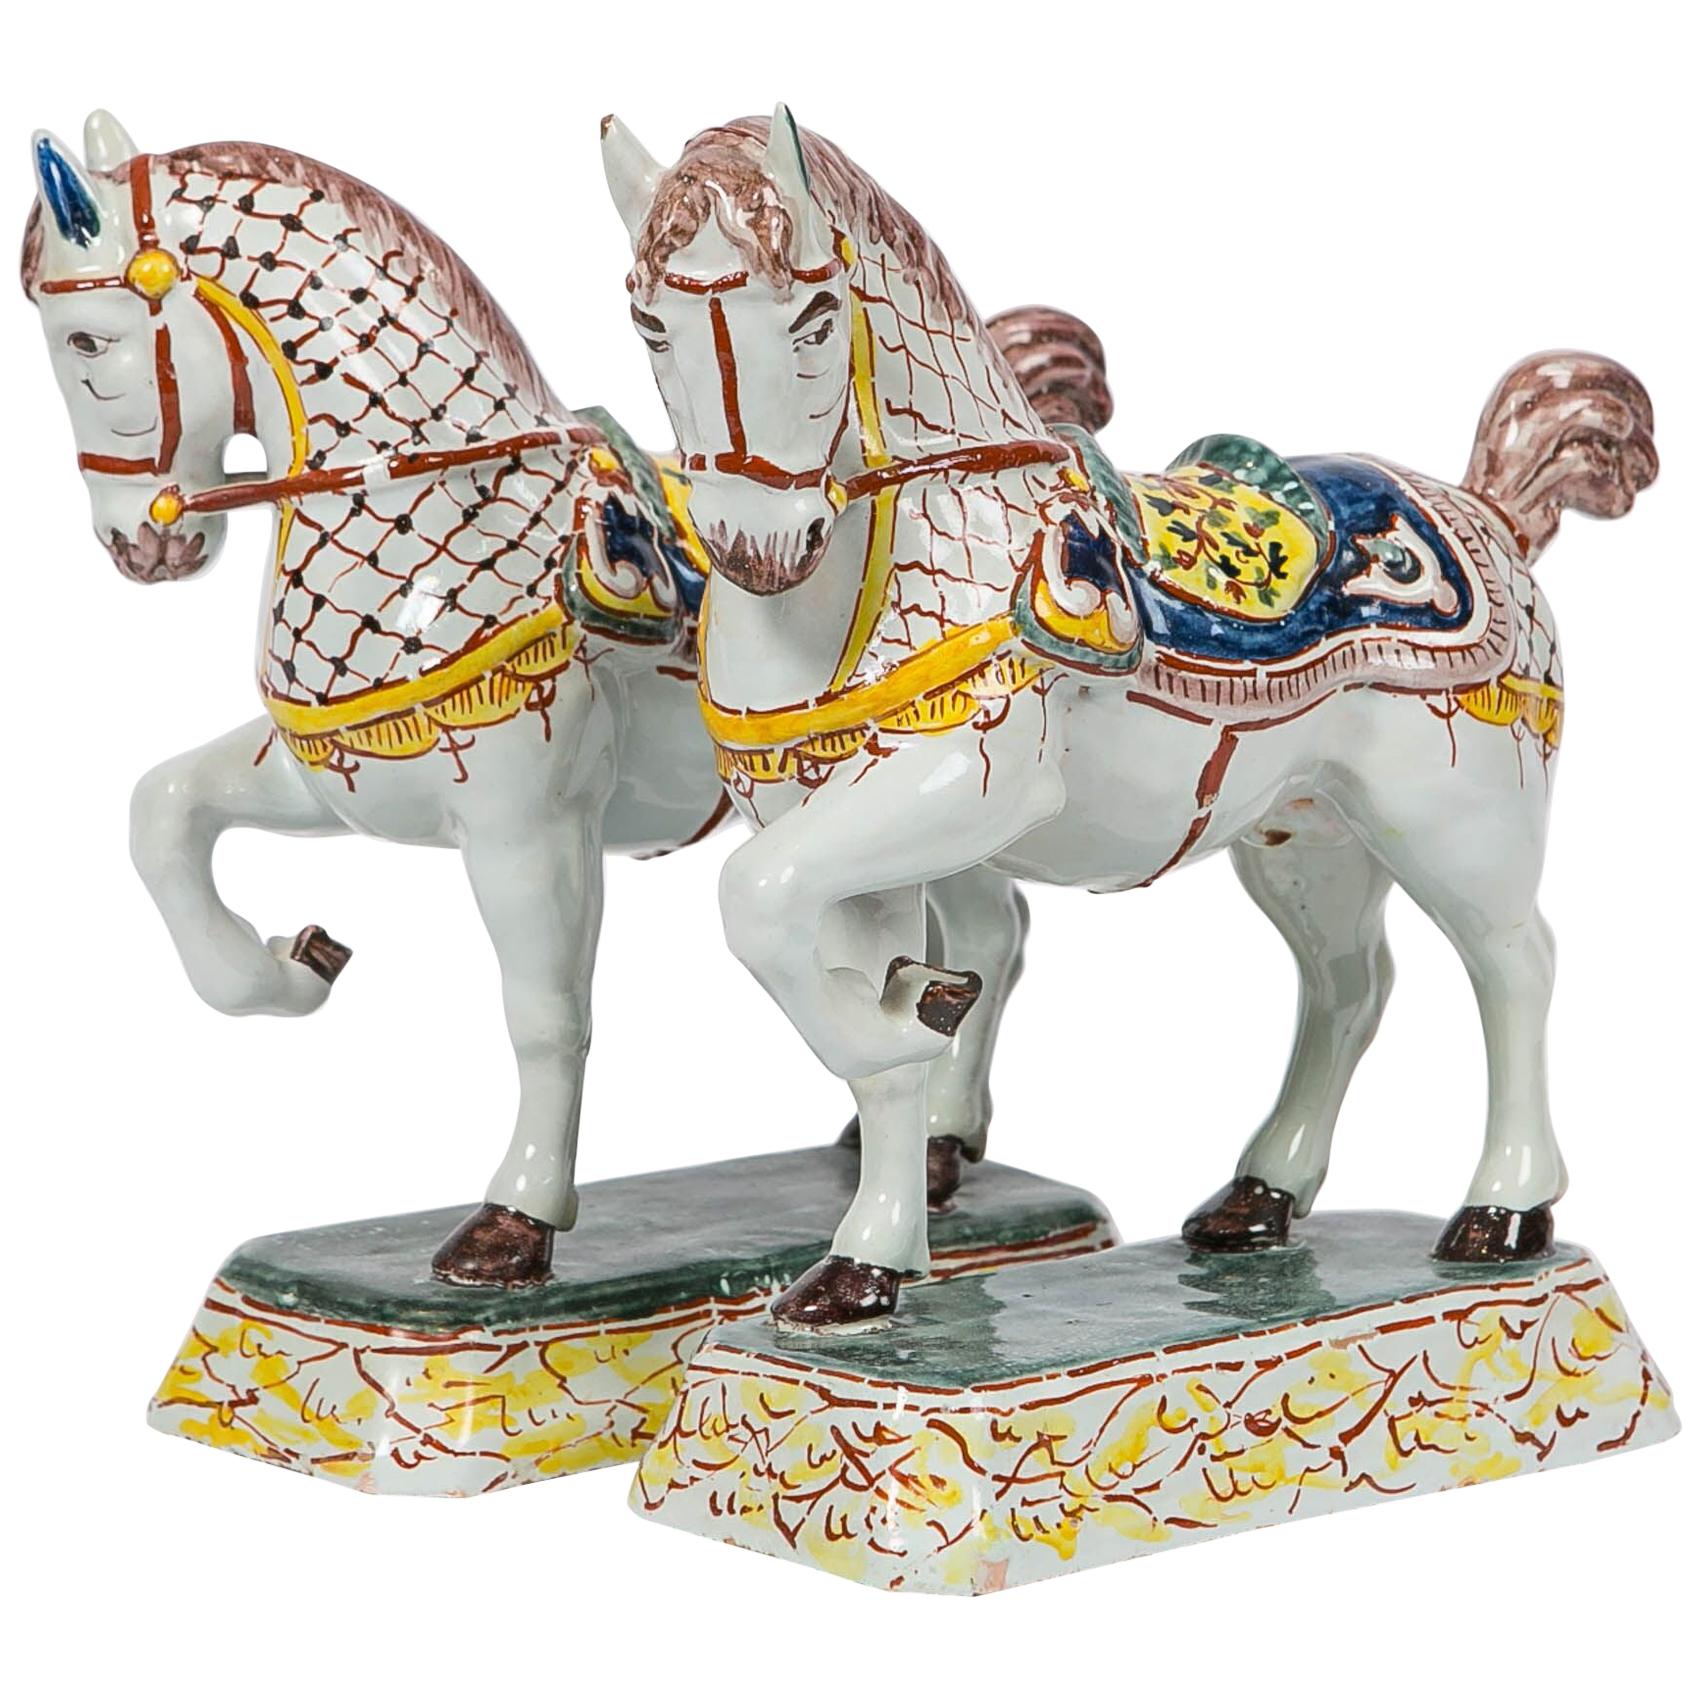 Dutch Delft Horses Hand Painted in Polychrome Colors Made Mid-19th Century, Pair